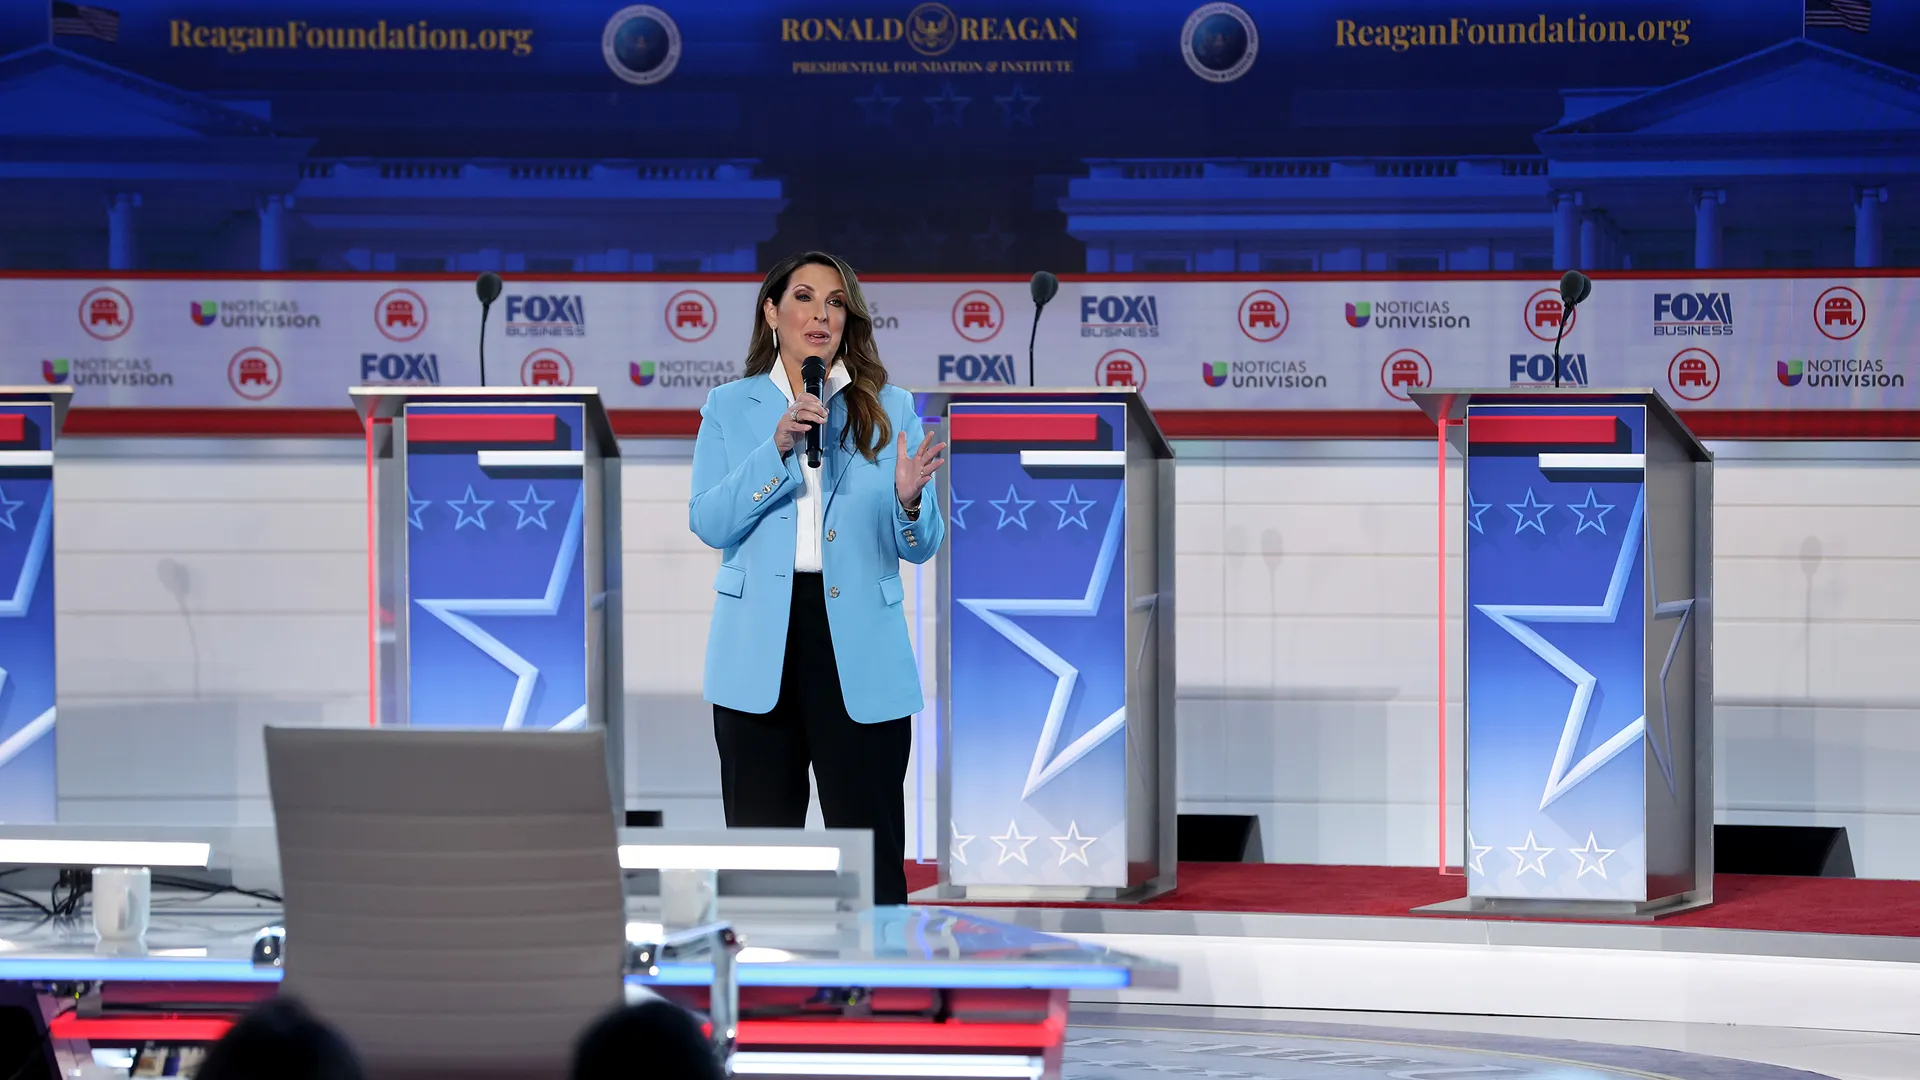 Lack of evidence undermines RNC's claims of election fraud (Credits: Getty Images)